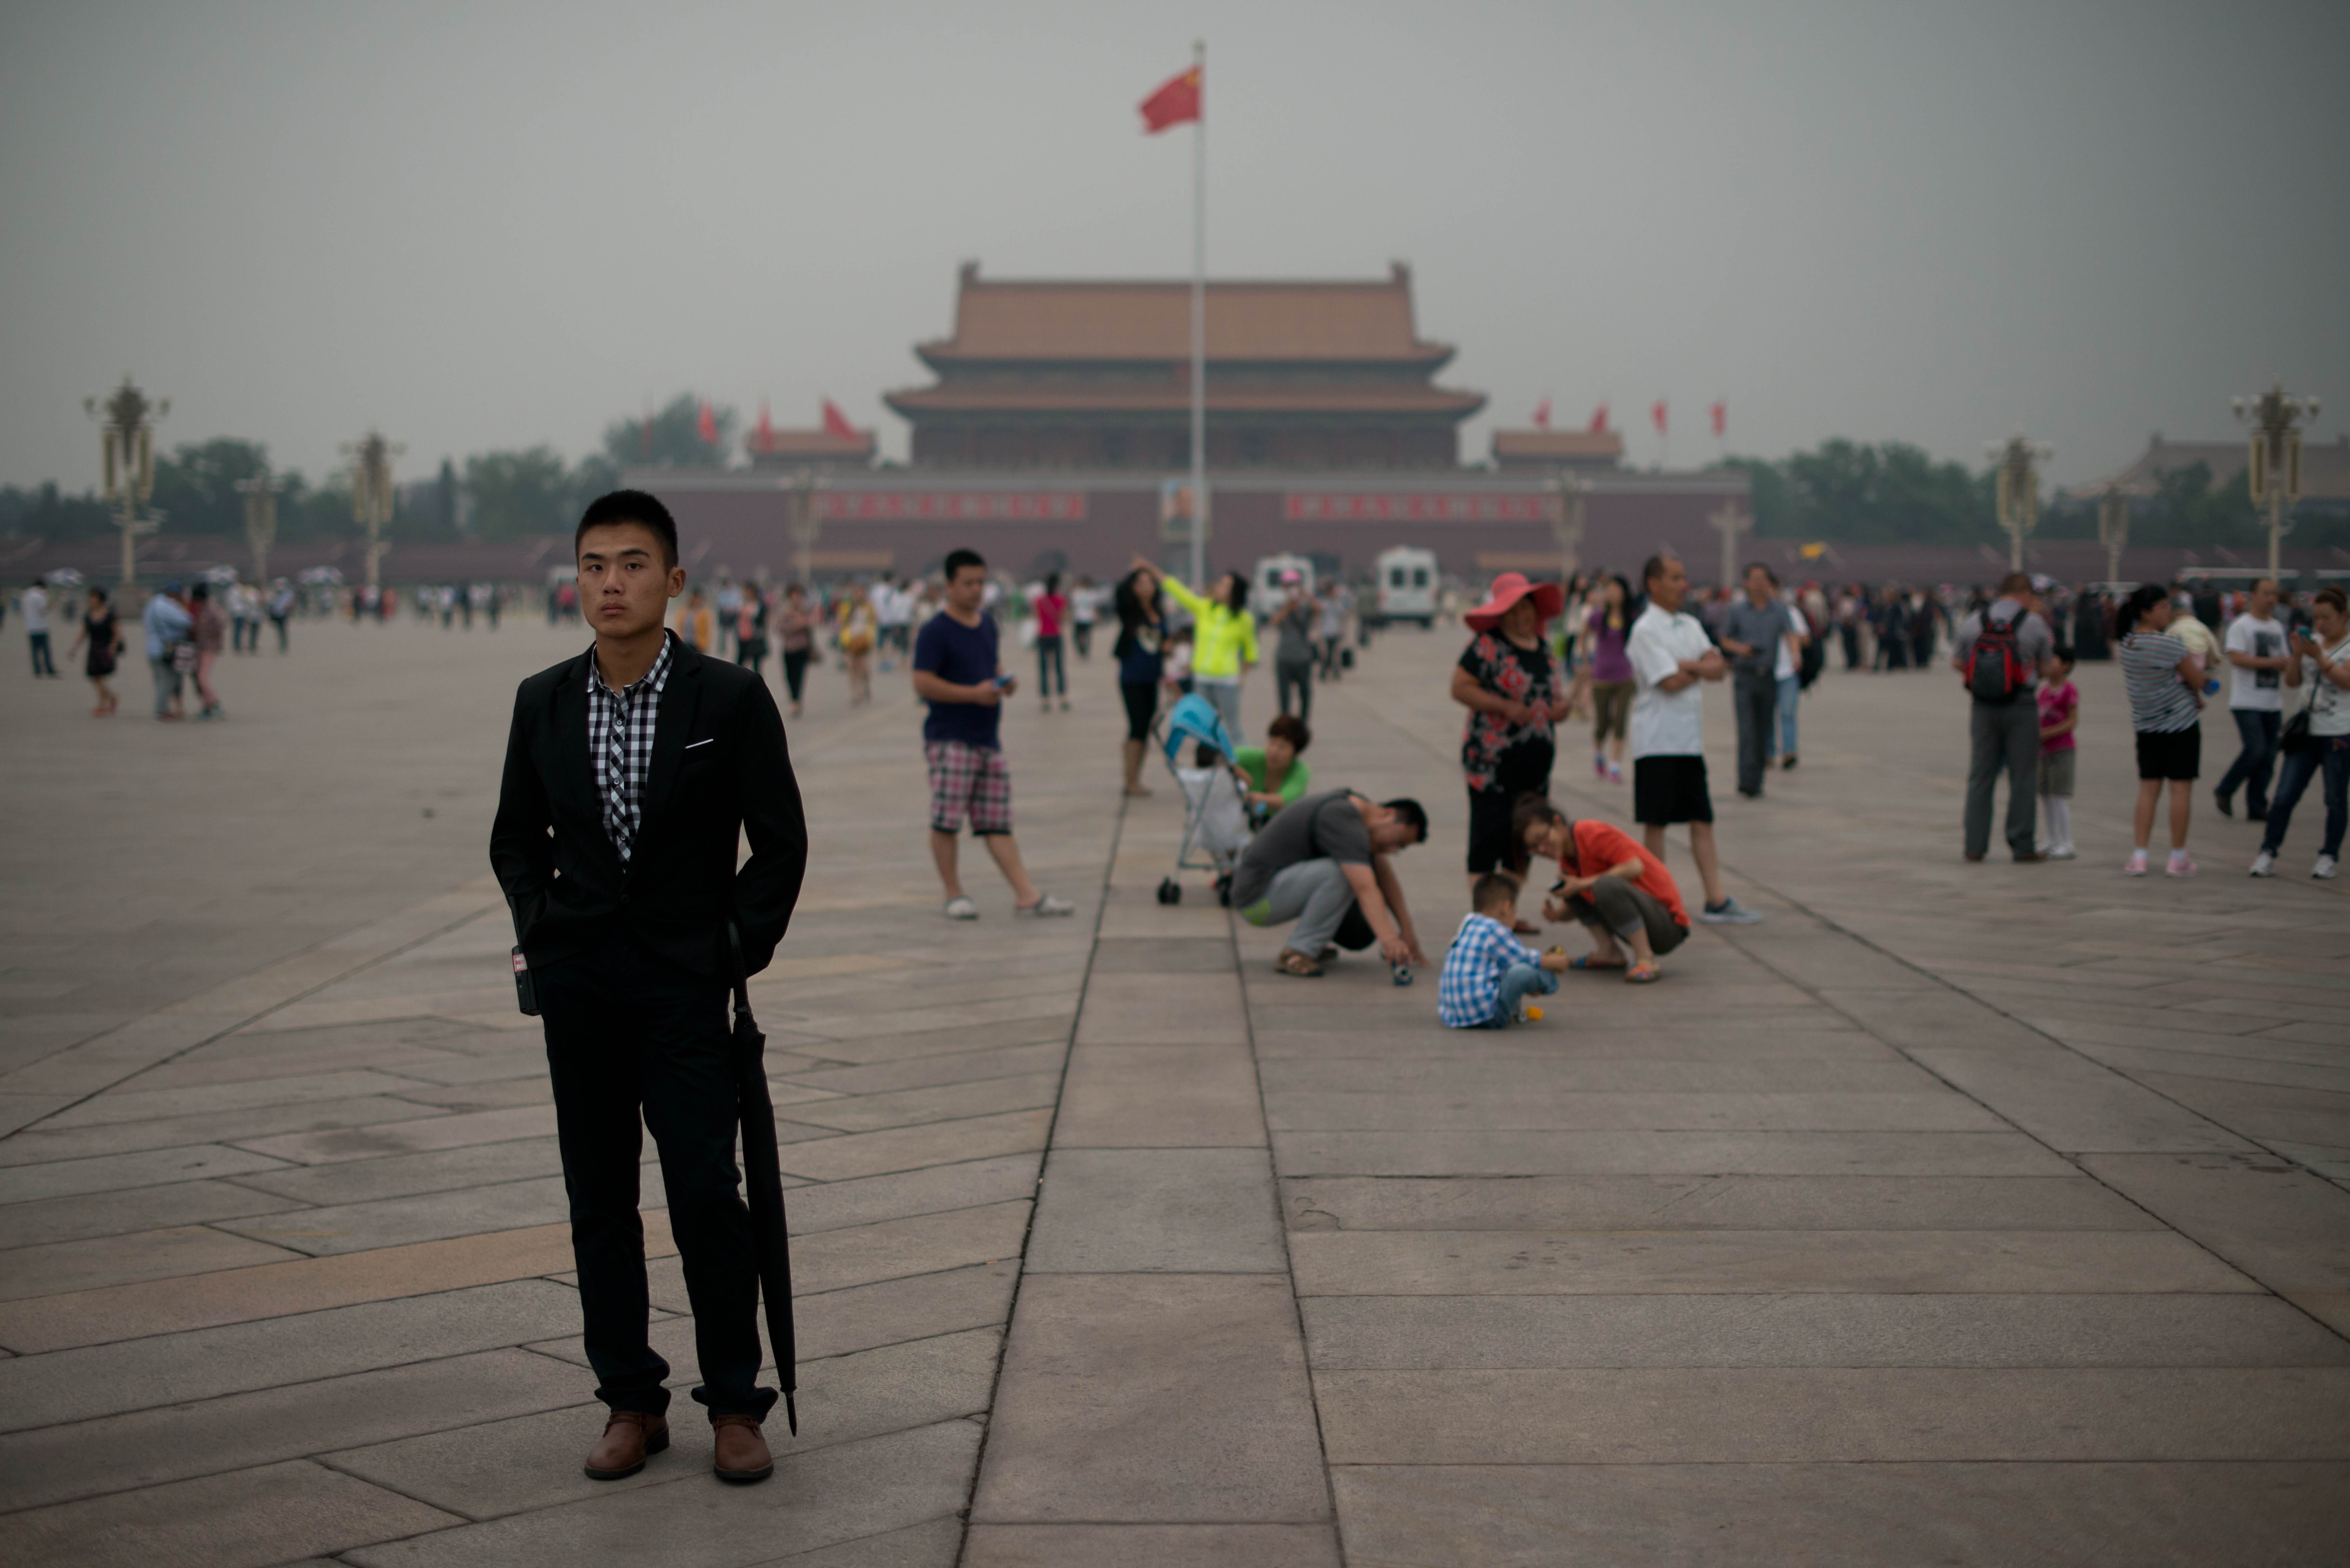 A plain-clothes policeman (left) follows suspected journalists on Tiananmen Square in Beijing on June 4, 2013. Photo: AFP